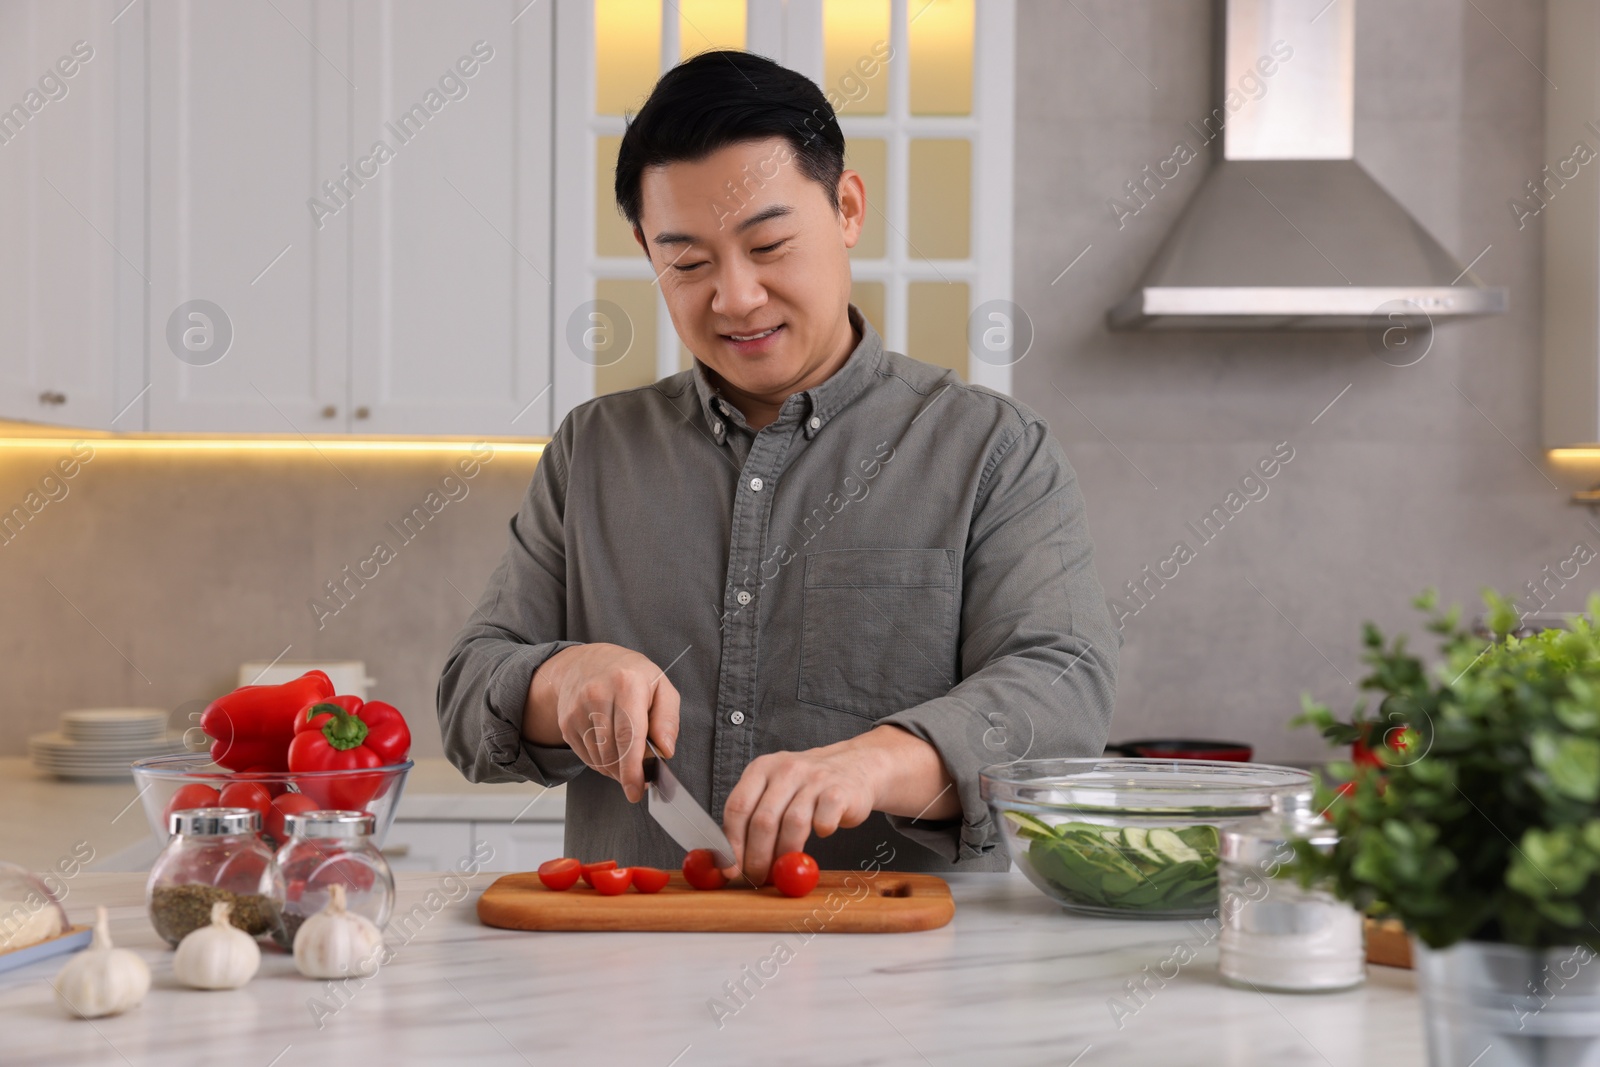 Photo of Cooking process. Man cutting fresh tomatoes at countertop in kitchen